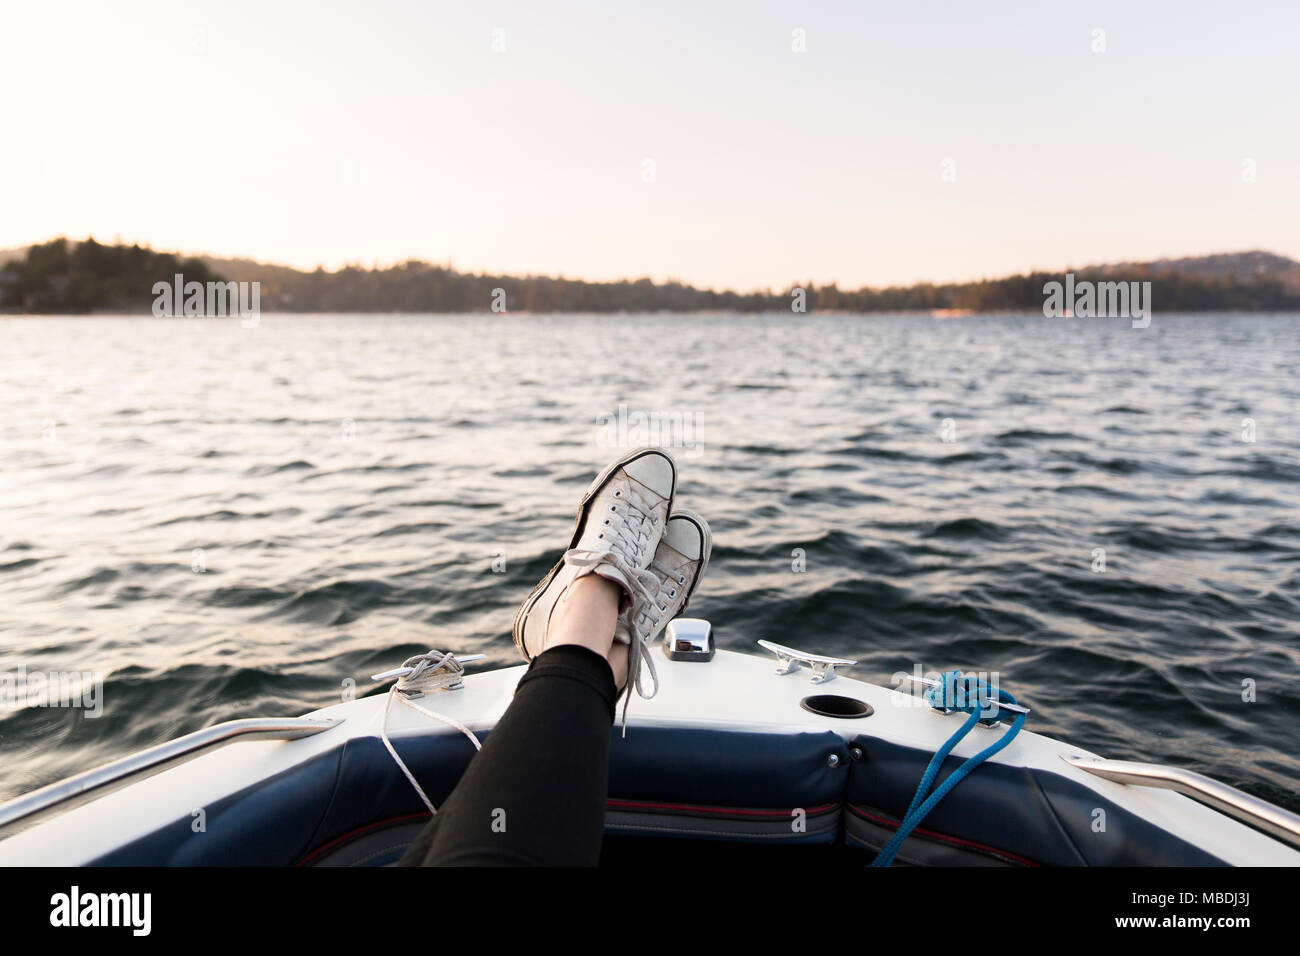 Personal perspective woman boating with feet up on tranquil lake Stock Photo